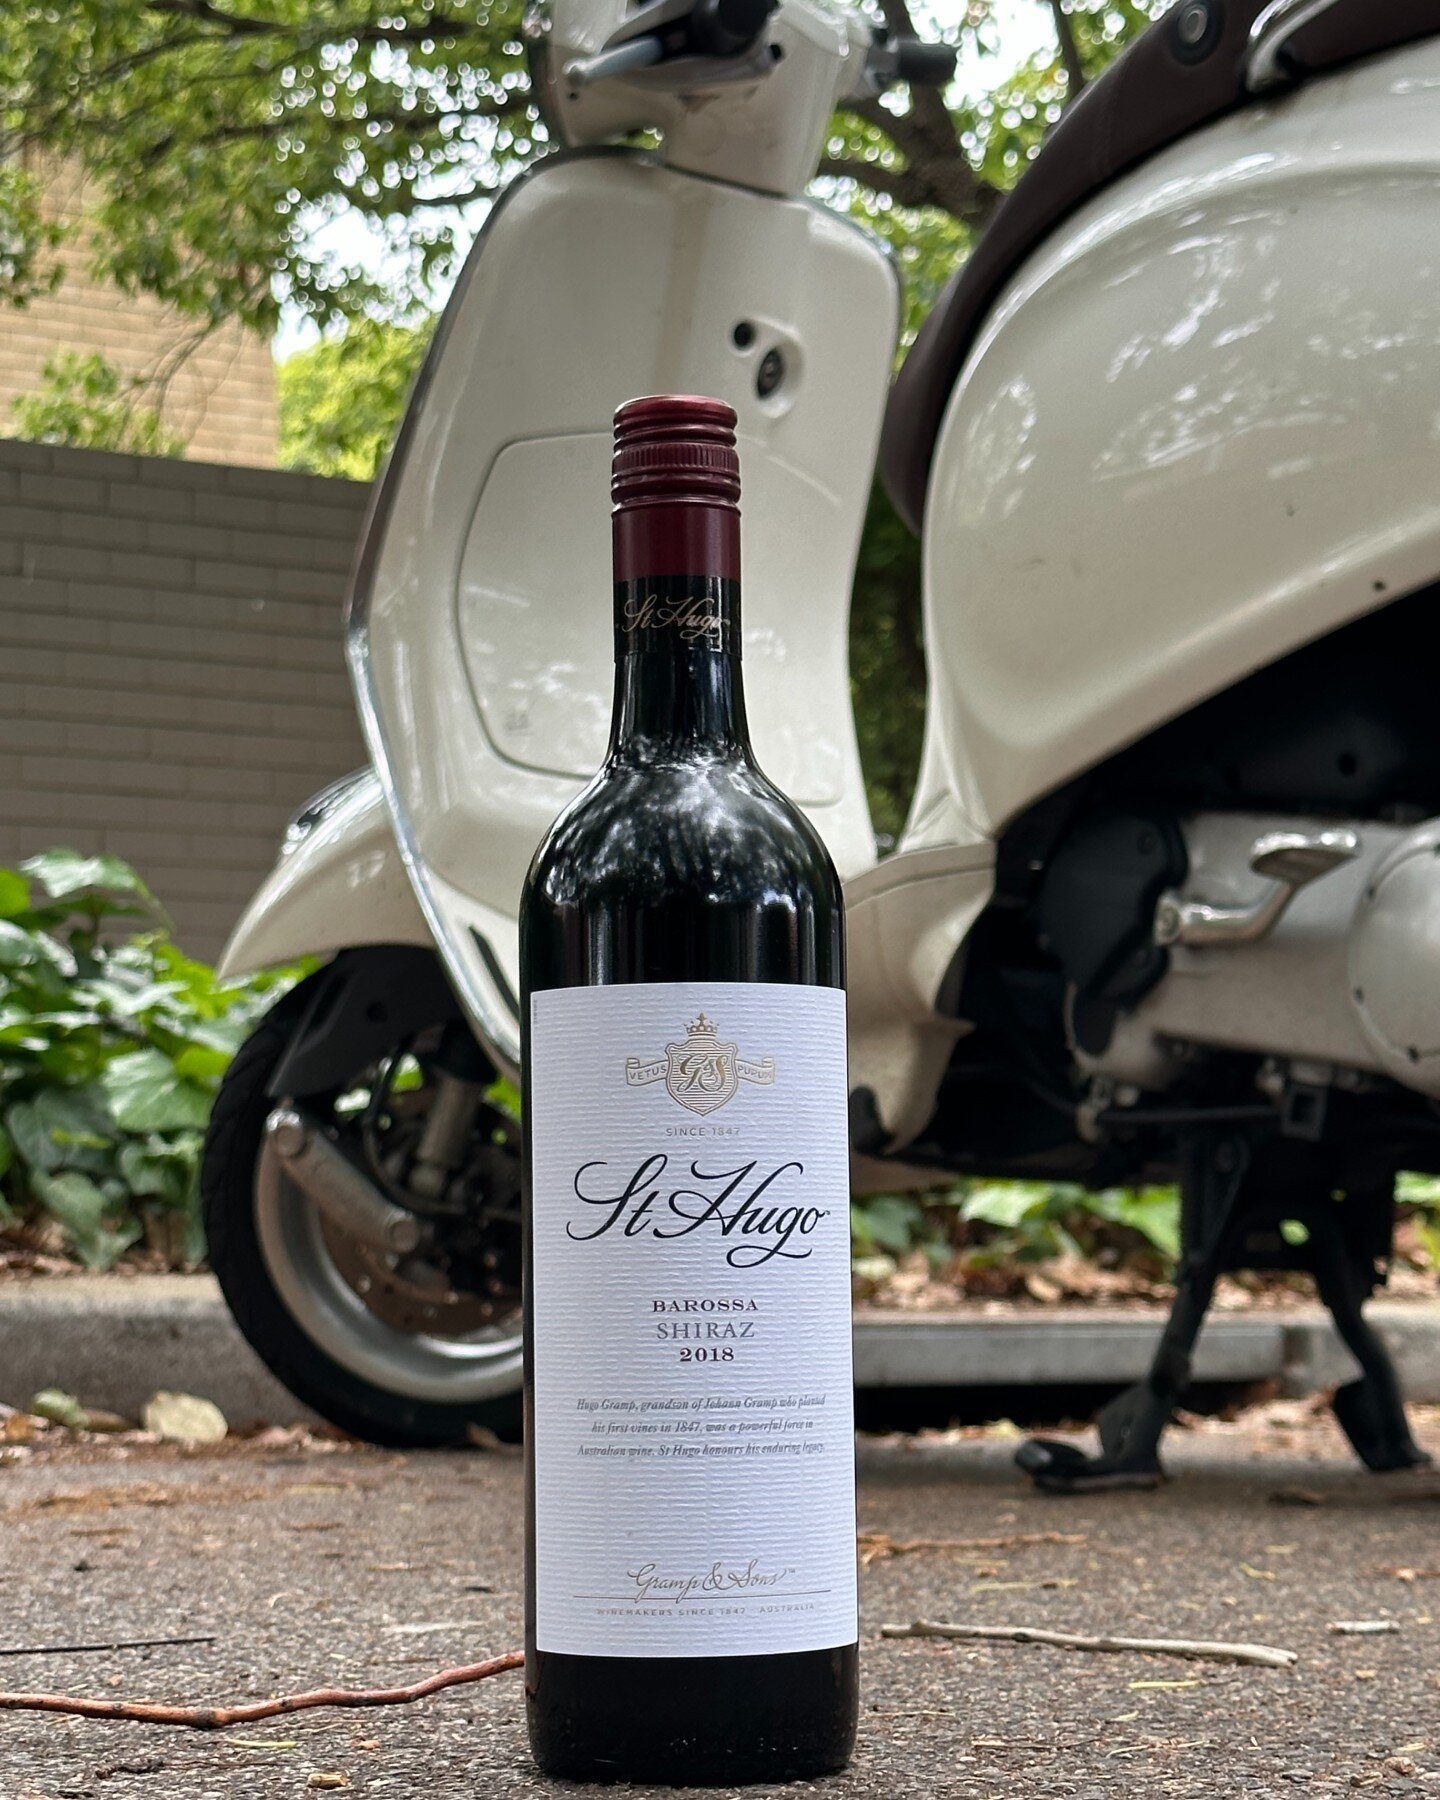 St Hugo Wines Barossa Shiraz is bright, robust and complex. This award-winning little number pours deep red with fresh aromas of berries, chocolate and an earthy core. Now available in-store 🍷🍇 

And their recent awards aren't bad either!
✨ 95 Poin